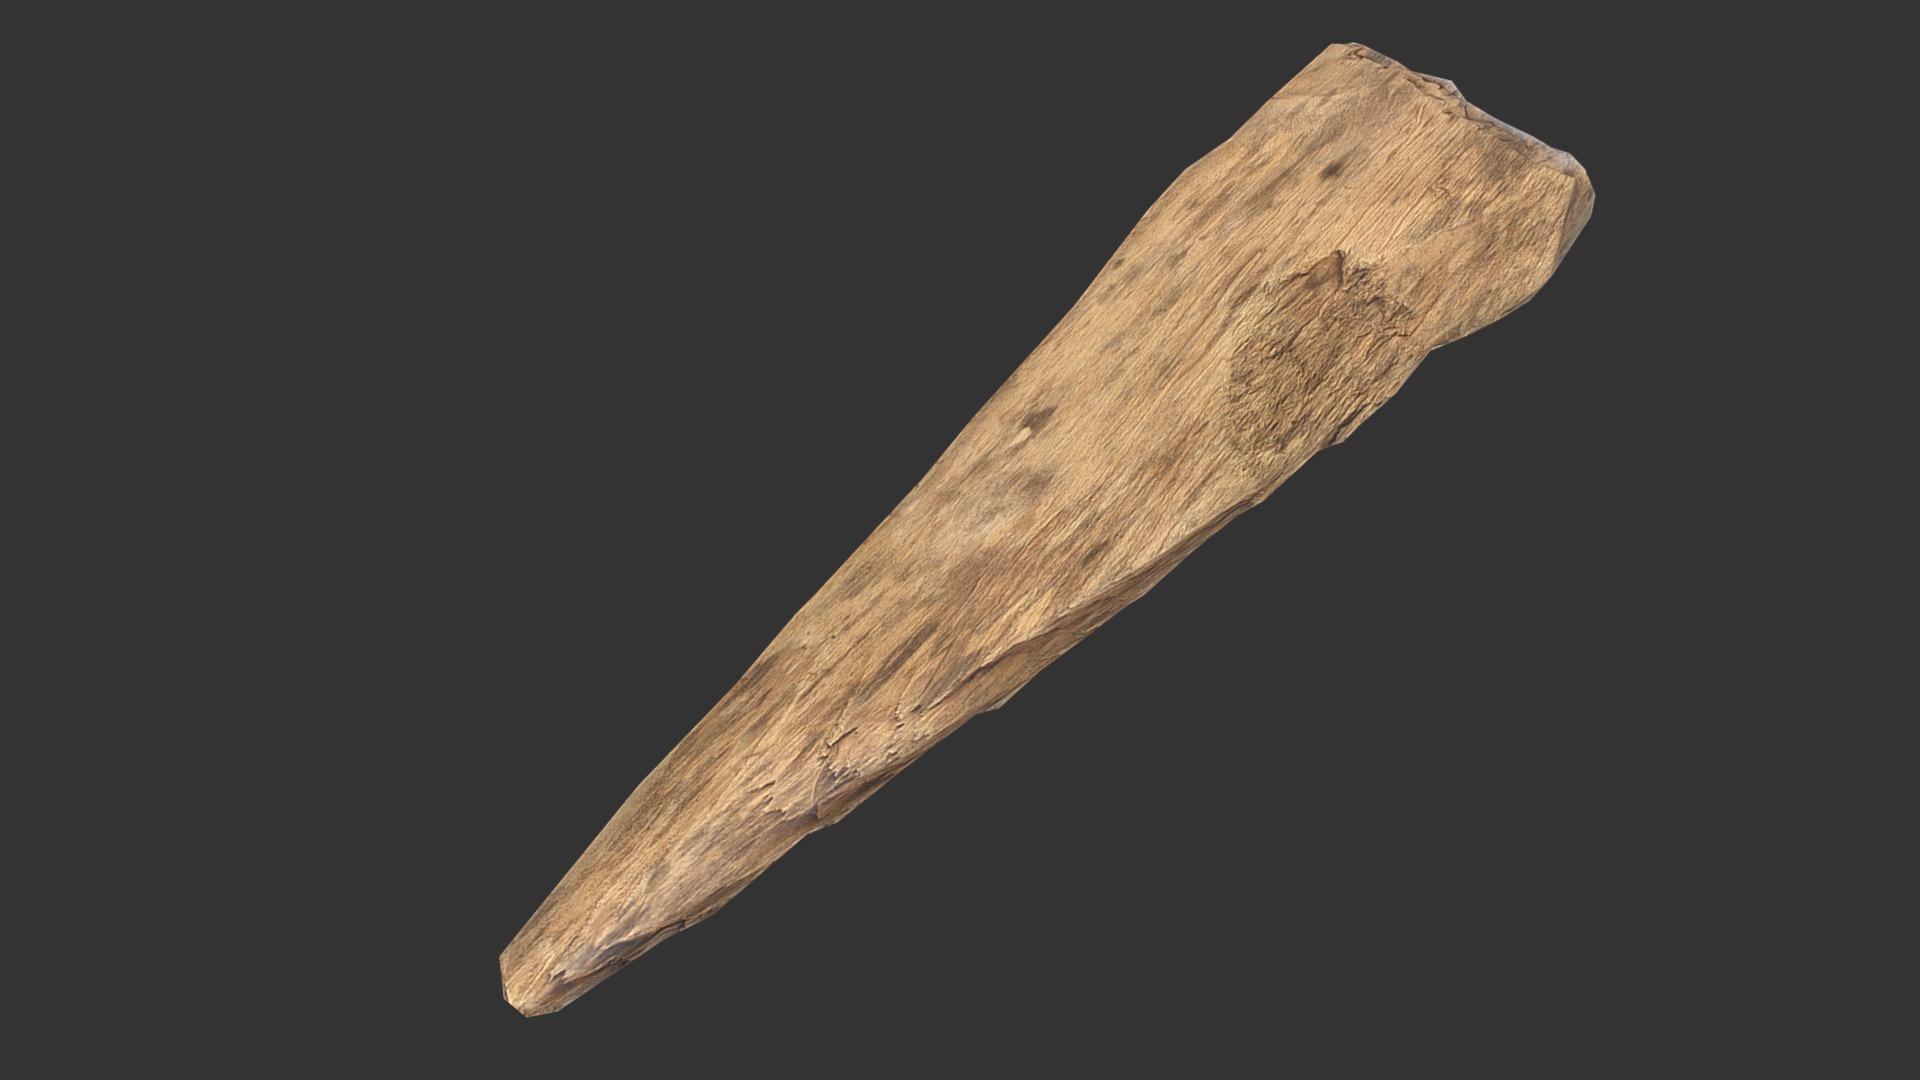 3D model Broken Plank - This is a 3D model of the Broken Plank. The 3D model is about a wooden stick with a black background.